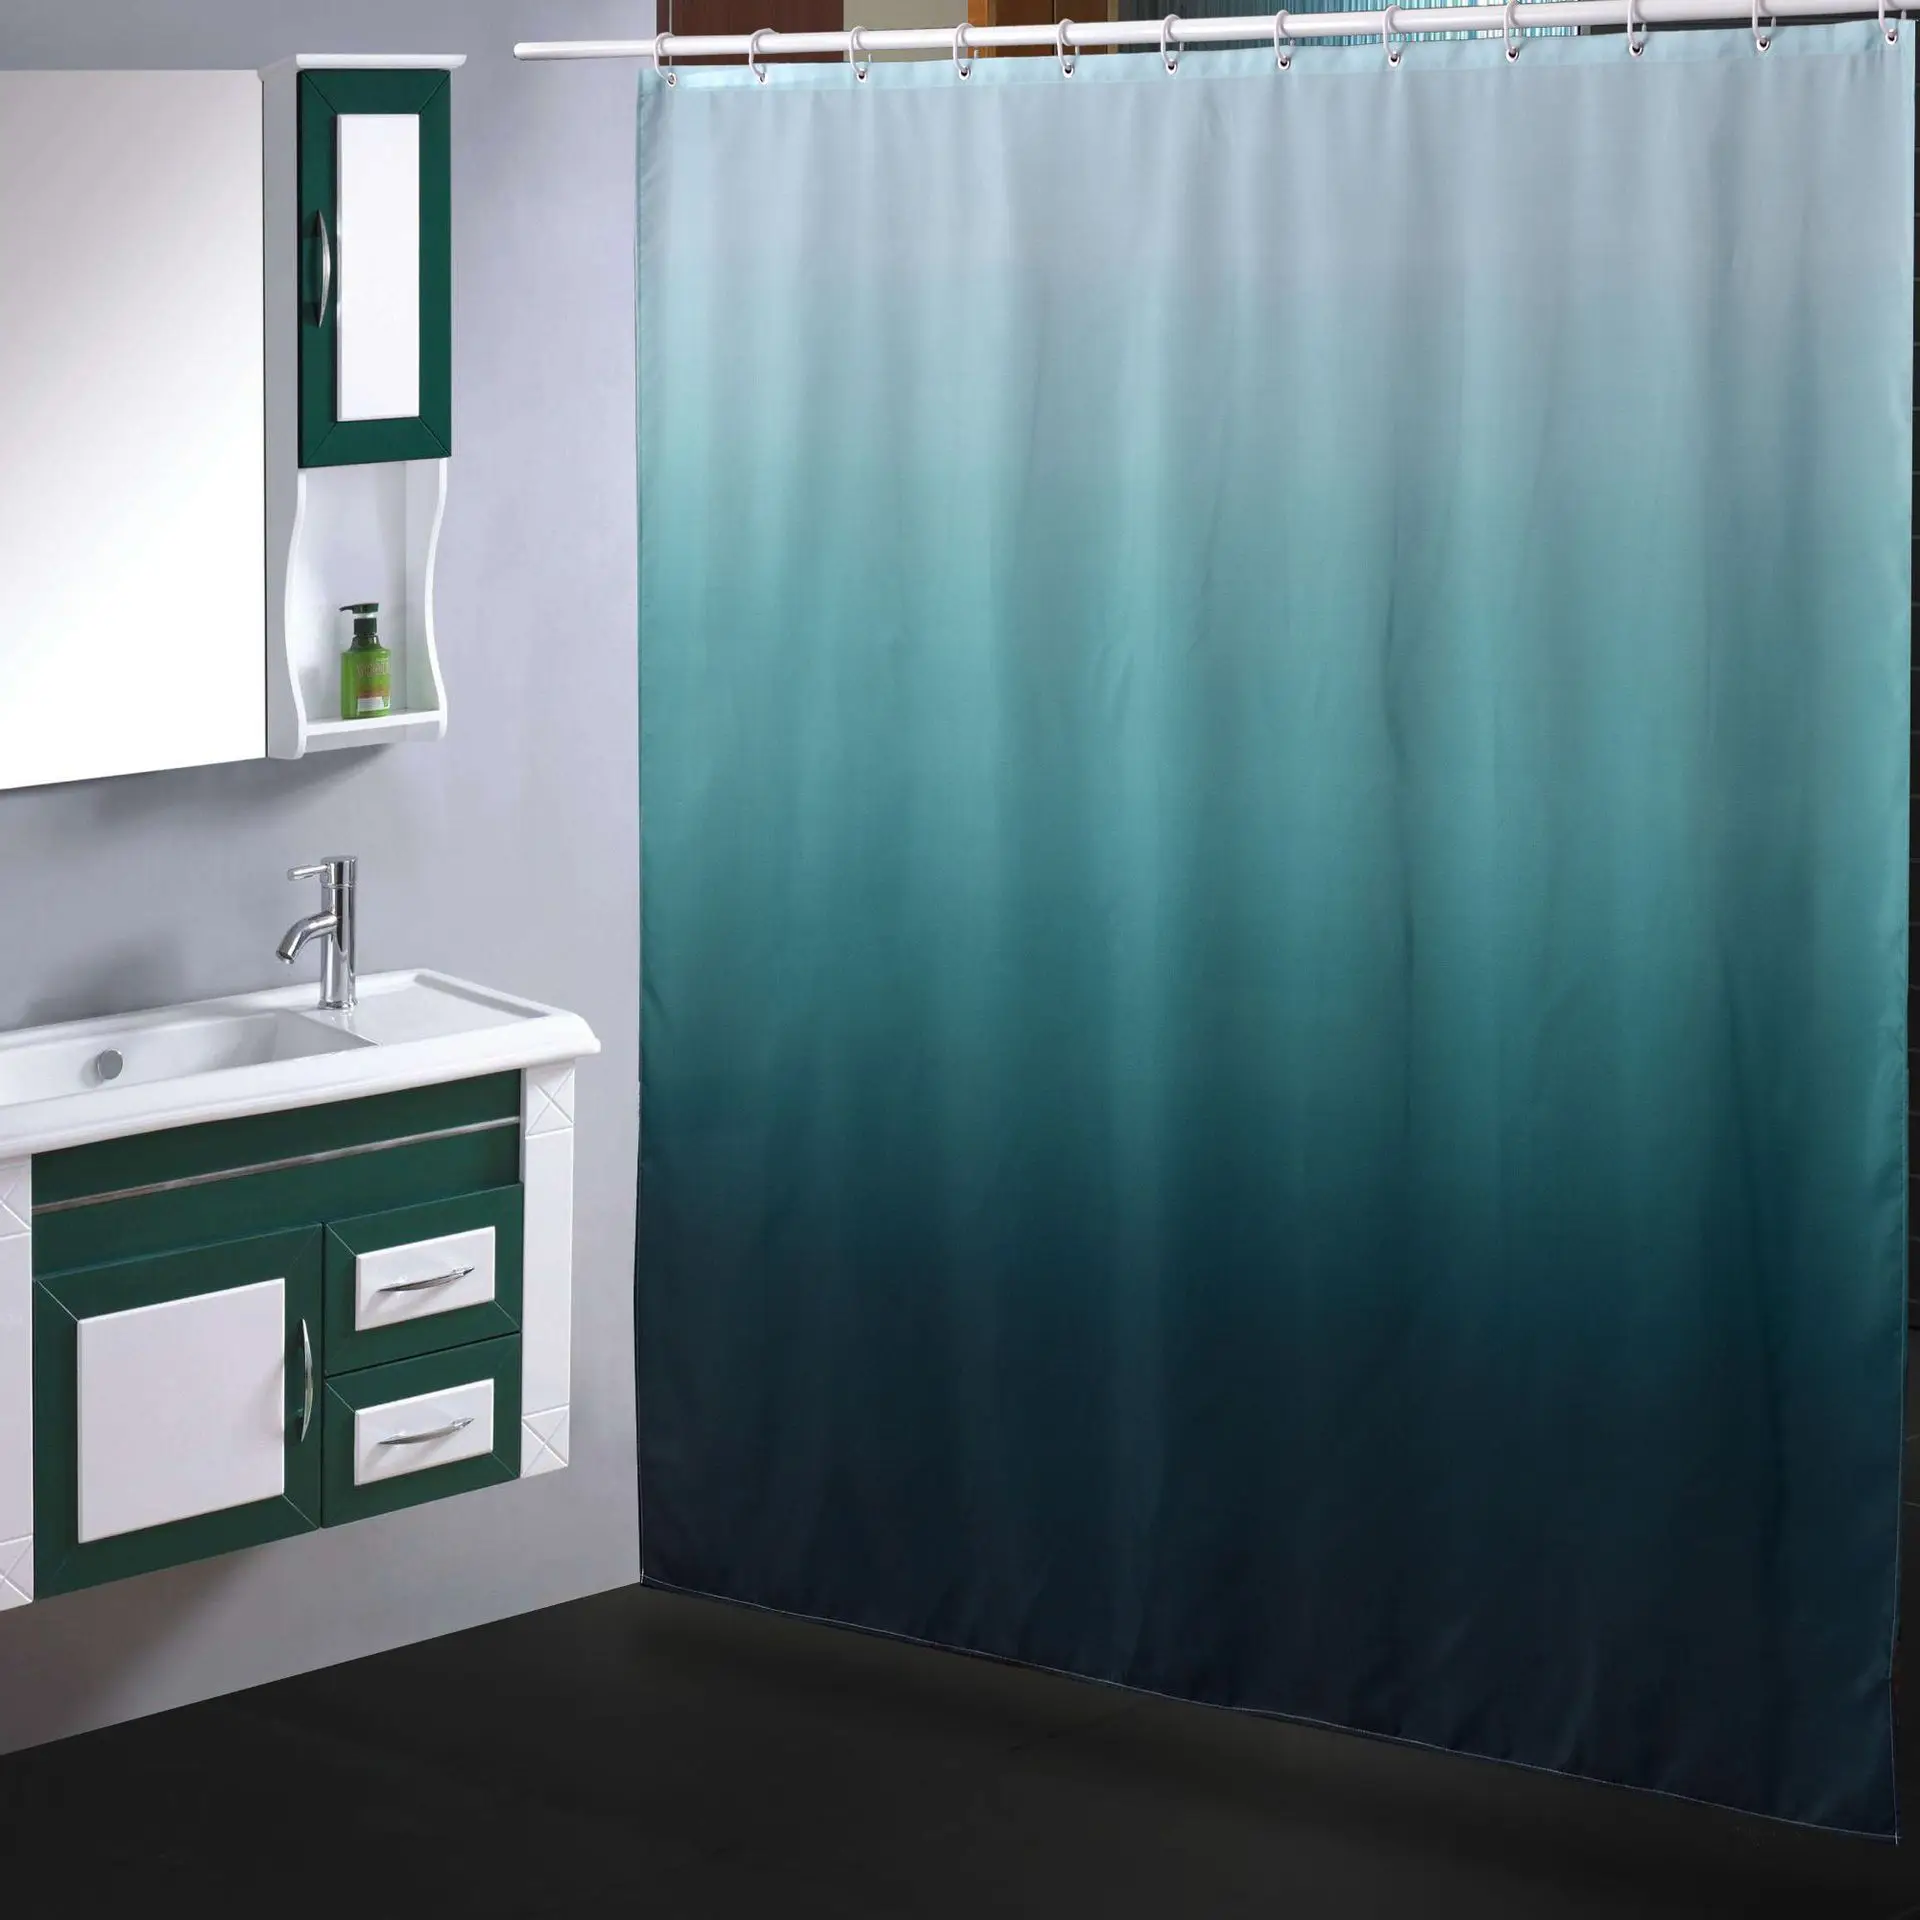 Waterproof Shower Curtain Set With Hooks Solid Color Bathroom Curtains For Batht 